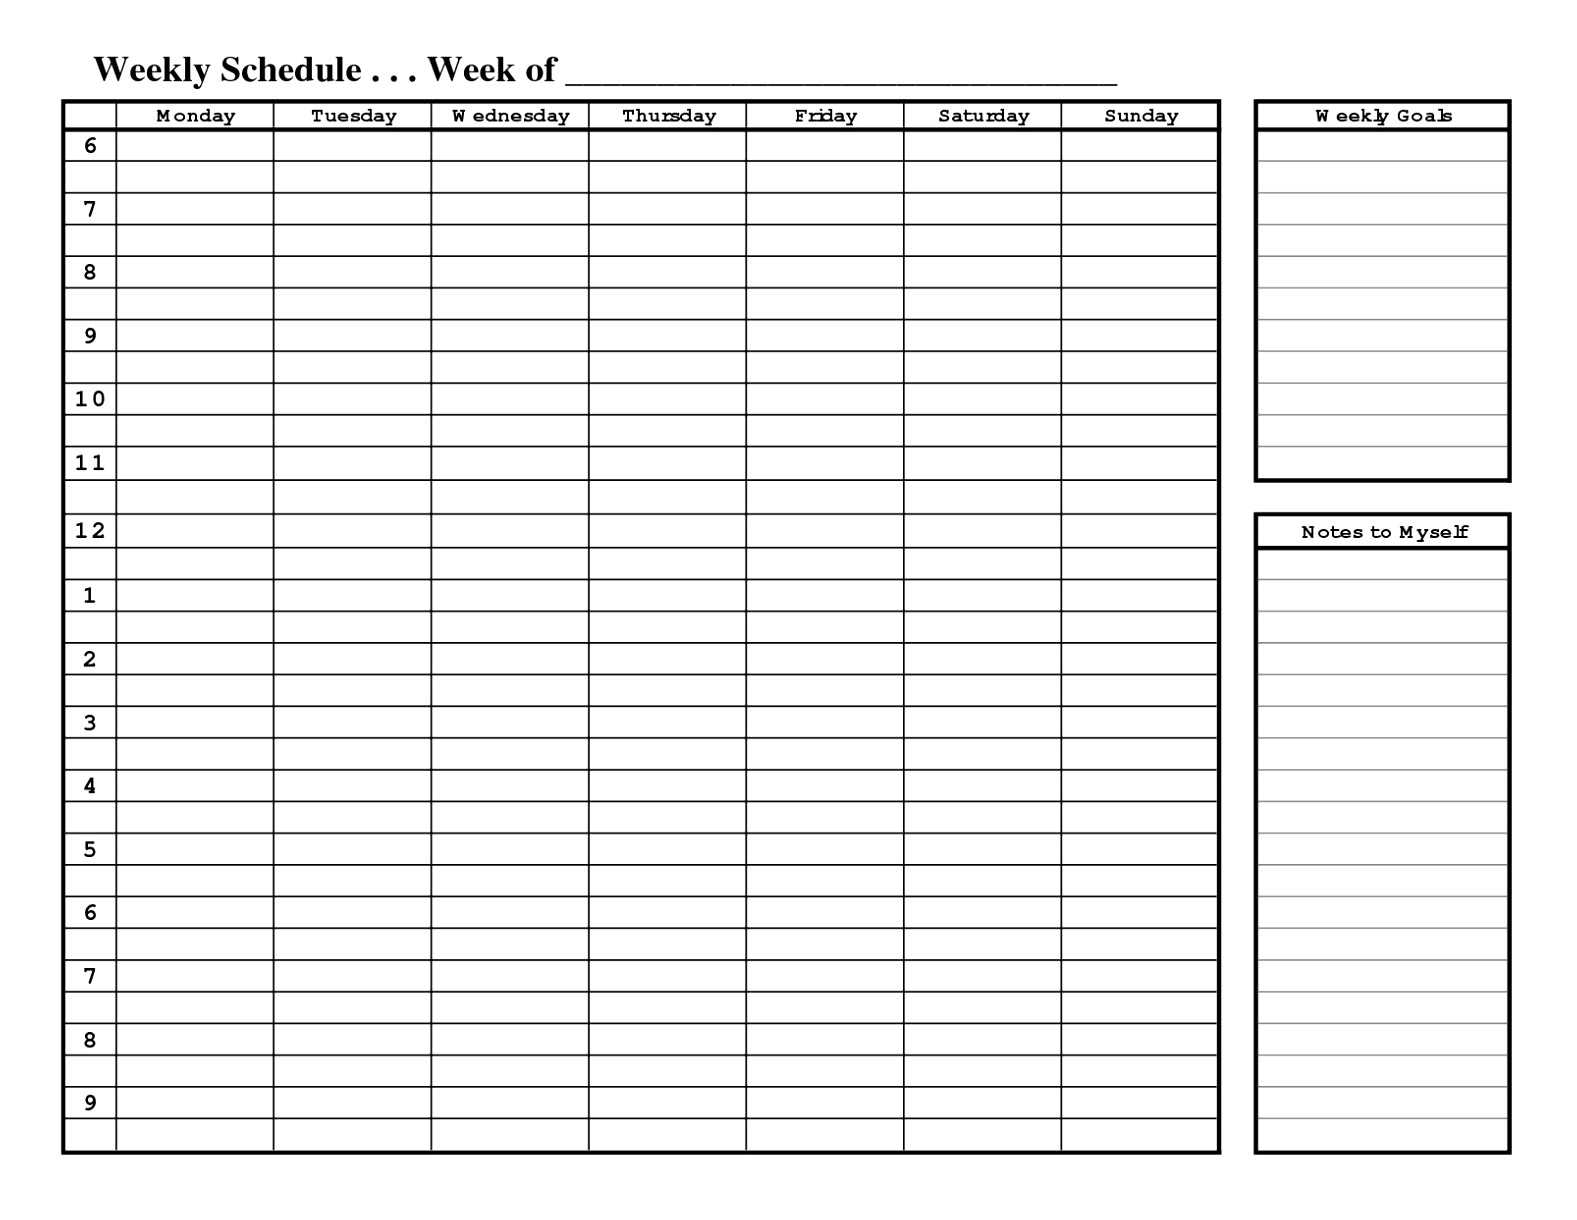 Free daily schedule planner template - Lasijohn